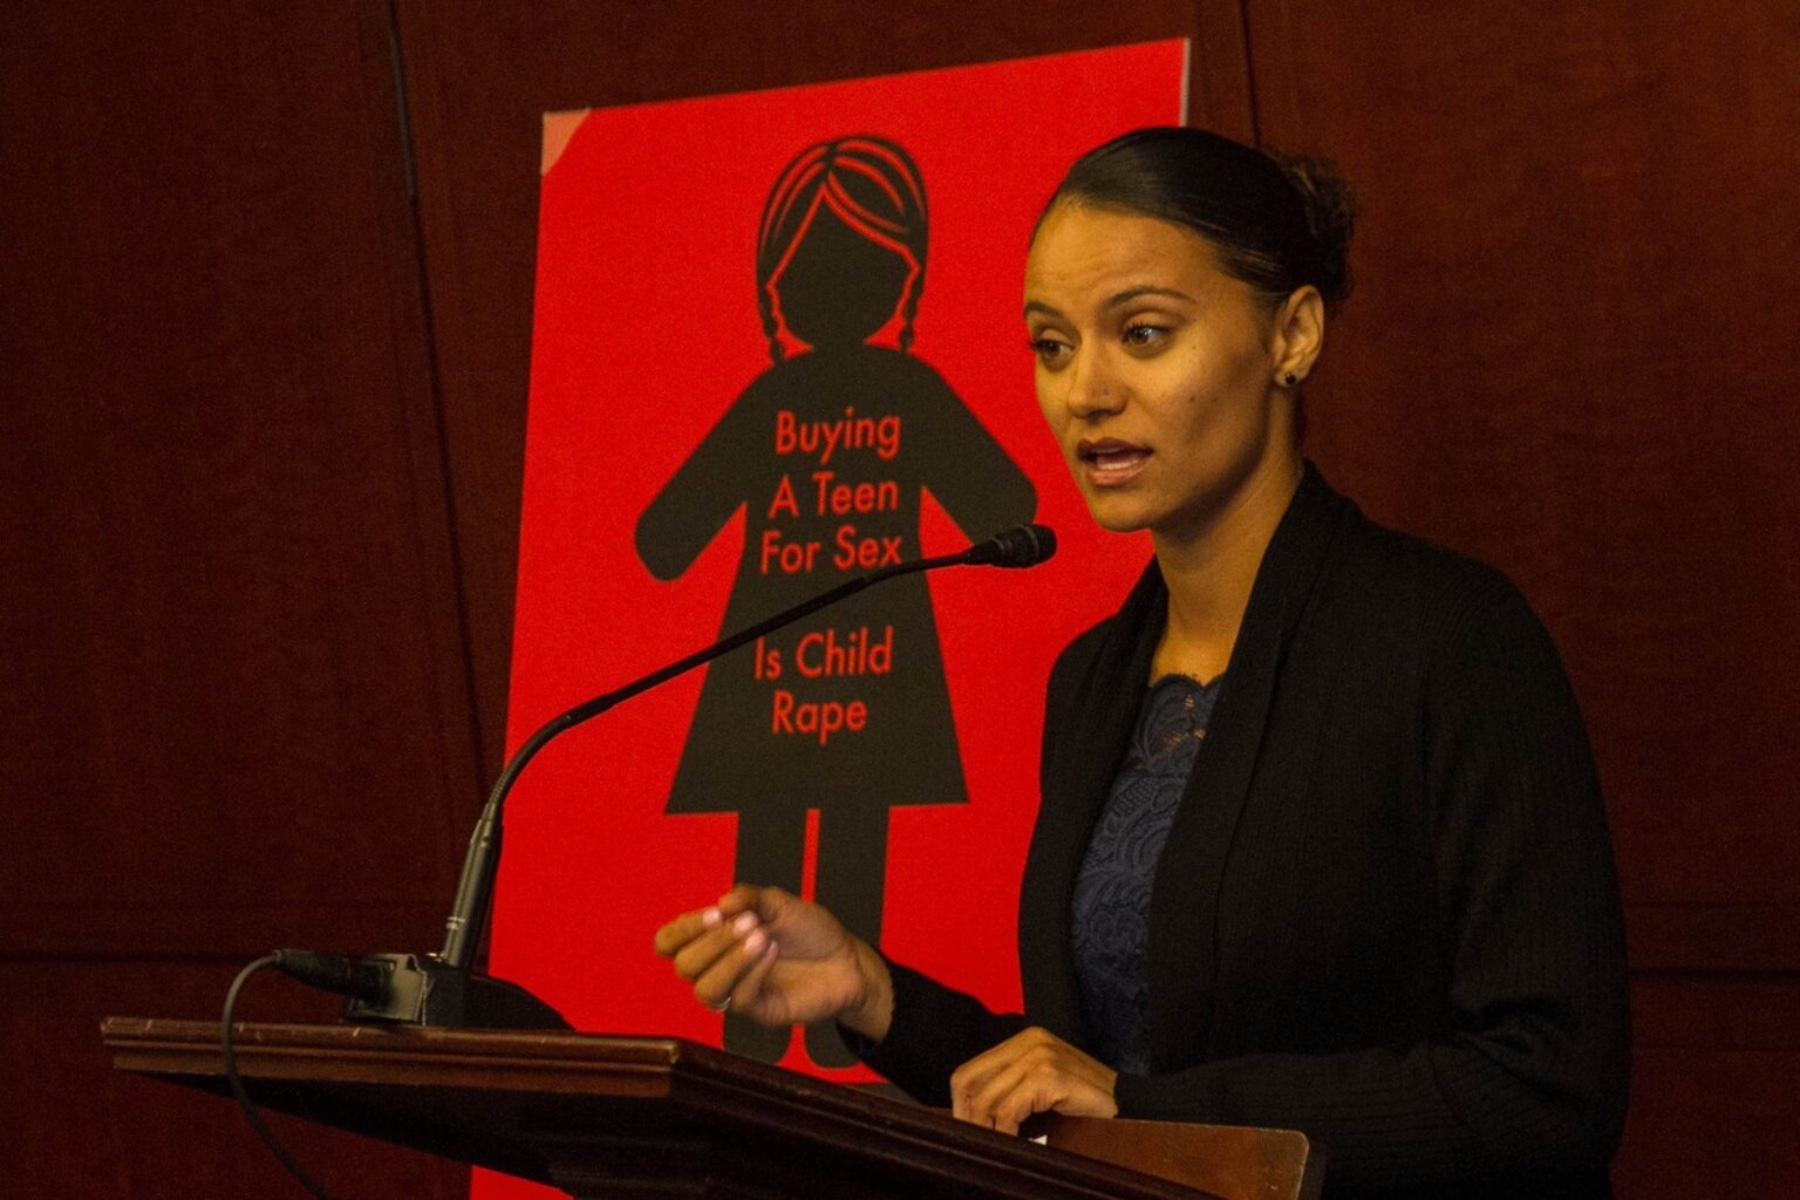 T Ortiz stands at a podium speaking into a microphone. Behind her is a red poster that reads, "buying a teen for sex is child rape."